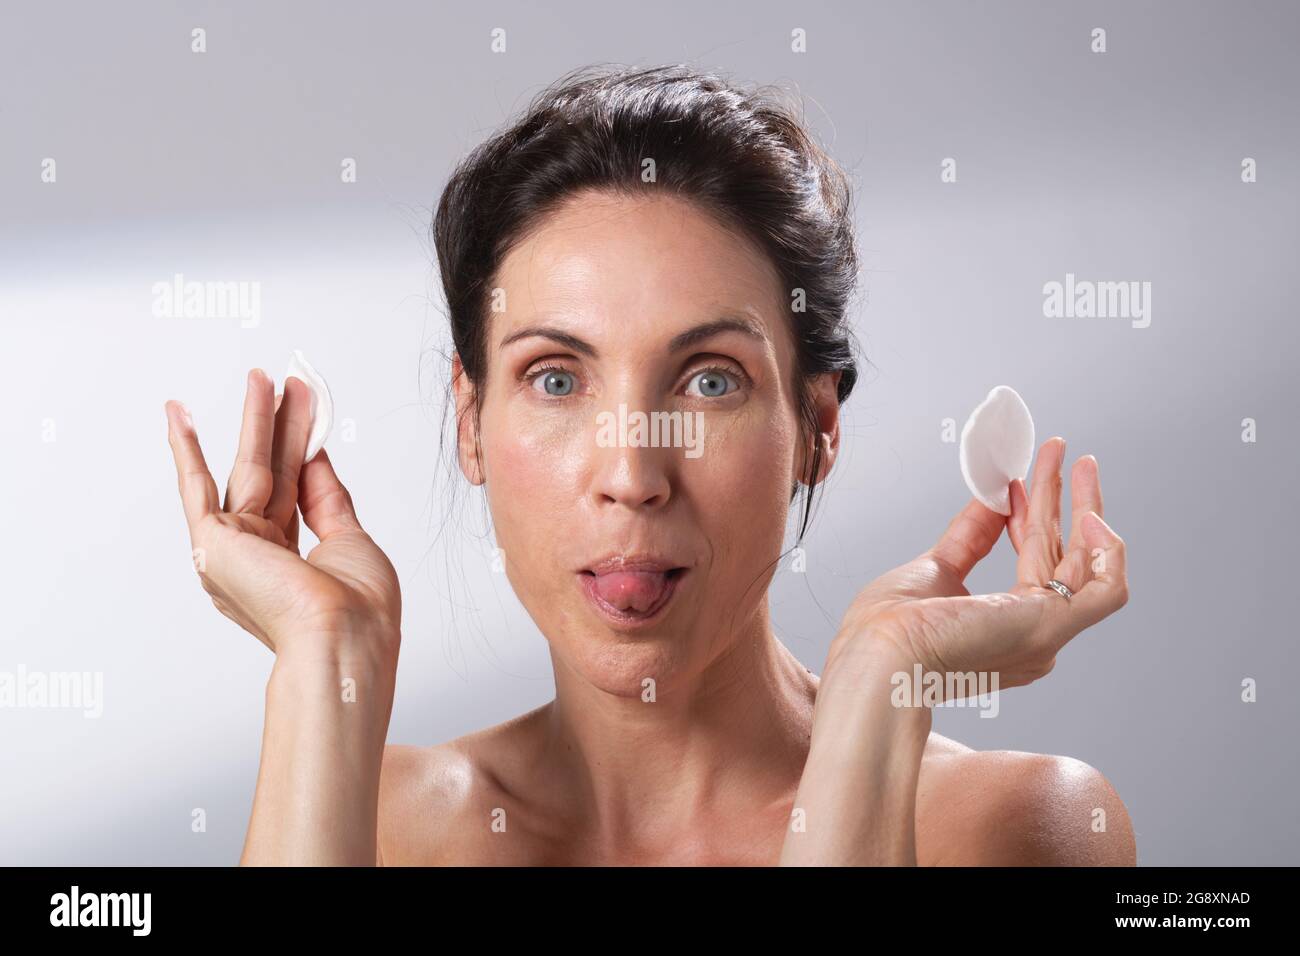 a woman having fun with a pair of cotton pads. Sticking her tongue out. Stock Photo